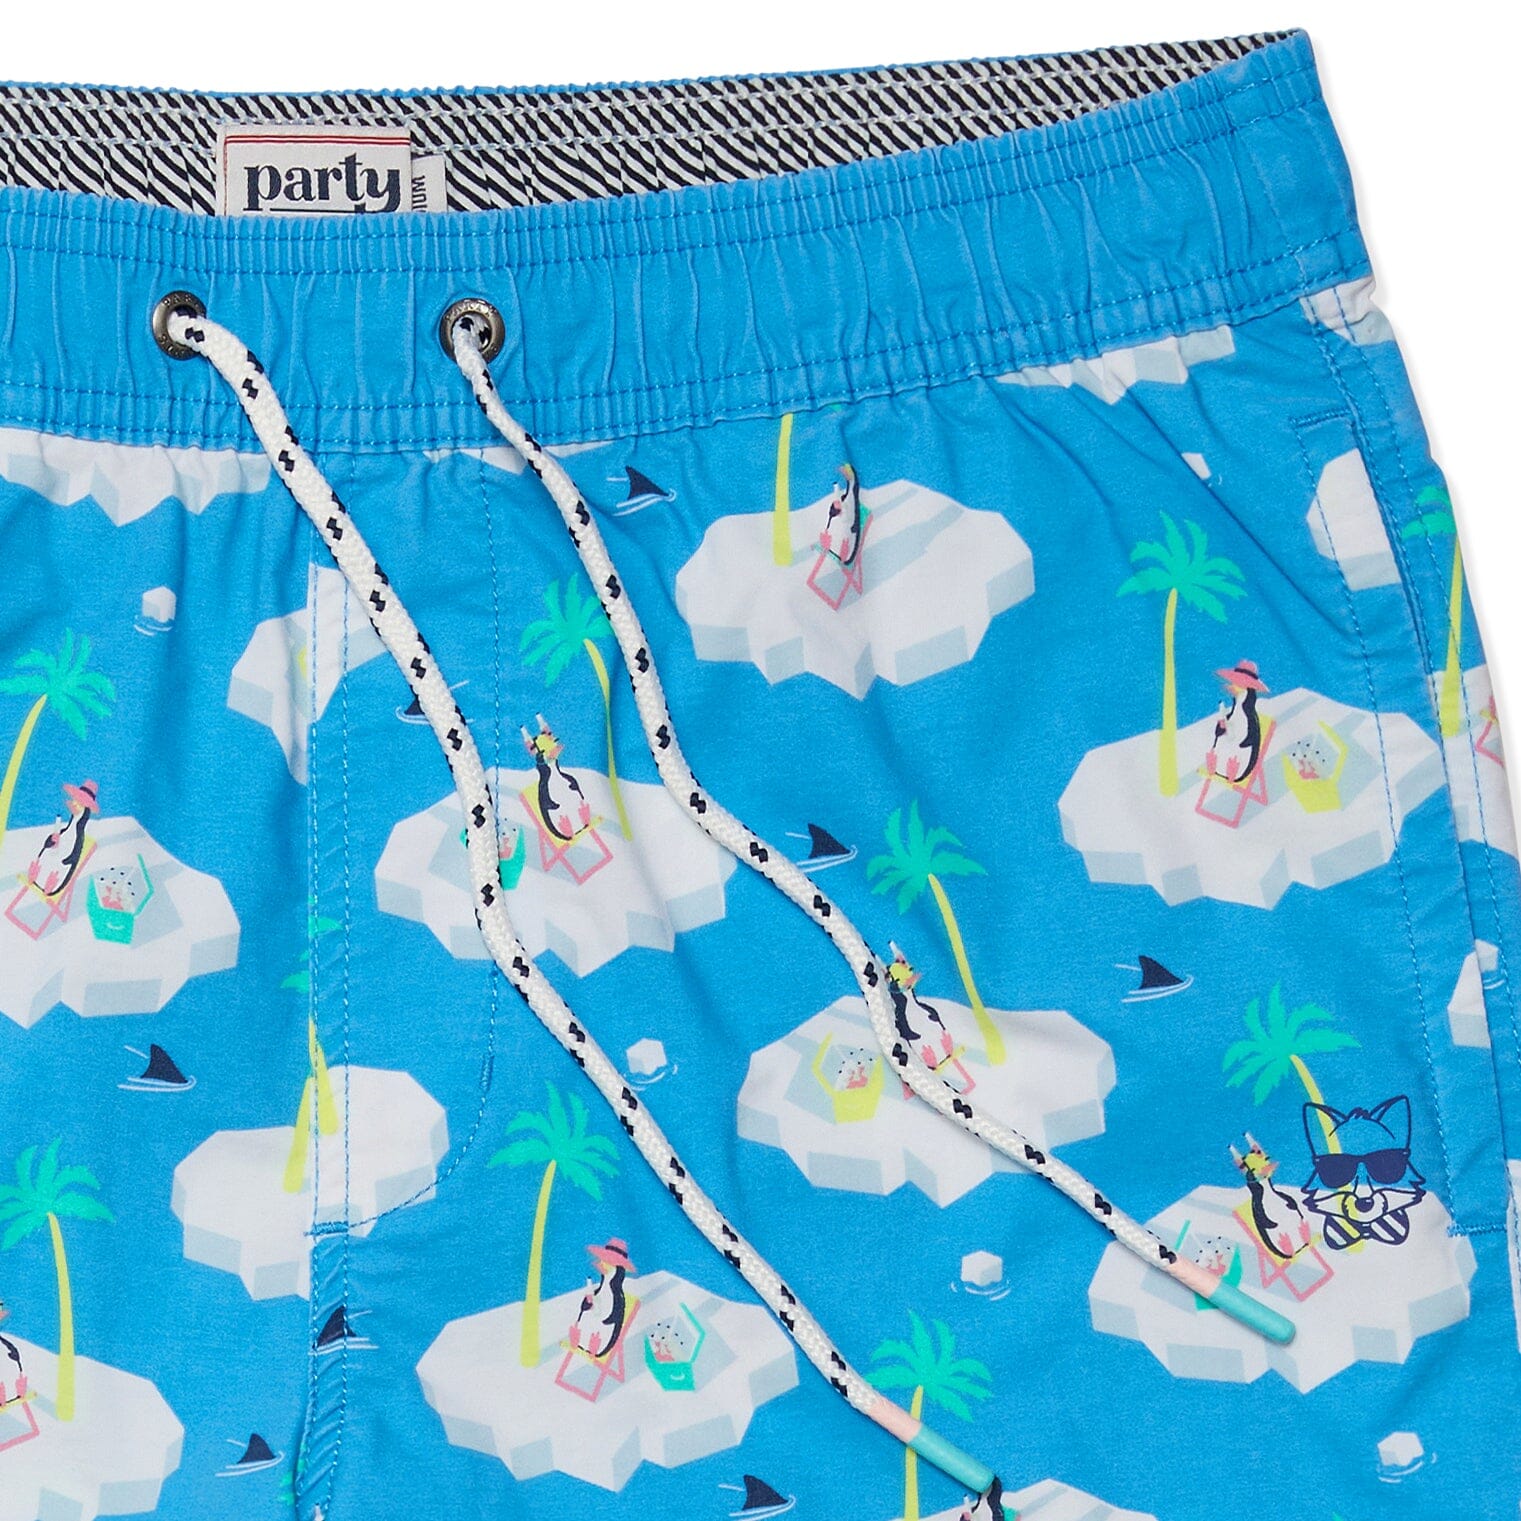 COLD CHILLIN PARTY STARTER SHORT - BLUE PRINTED SHORTS PARTY PANTS 